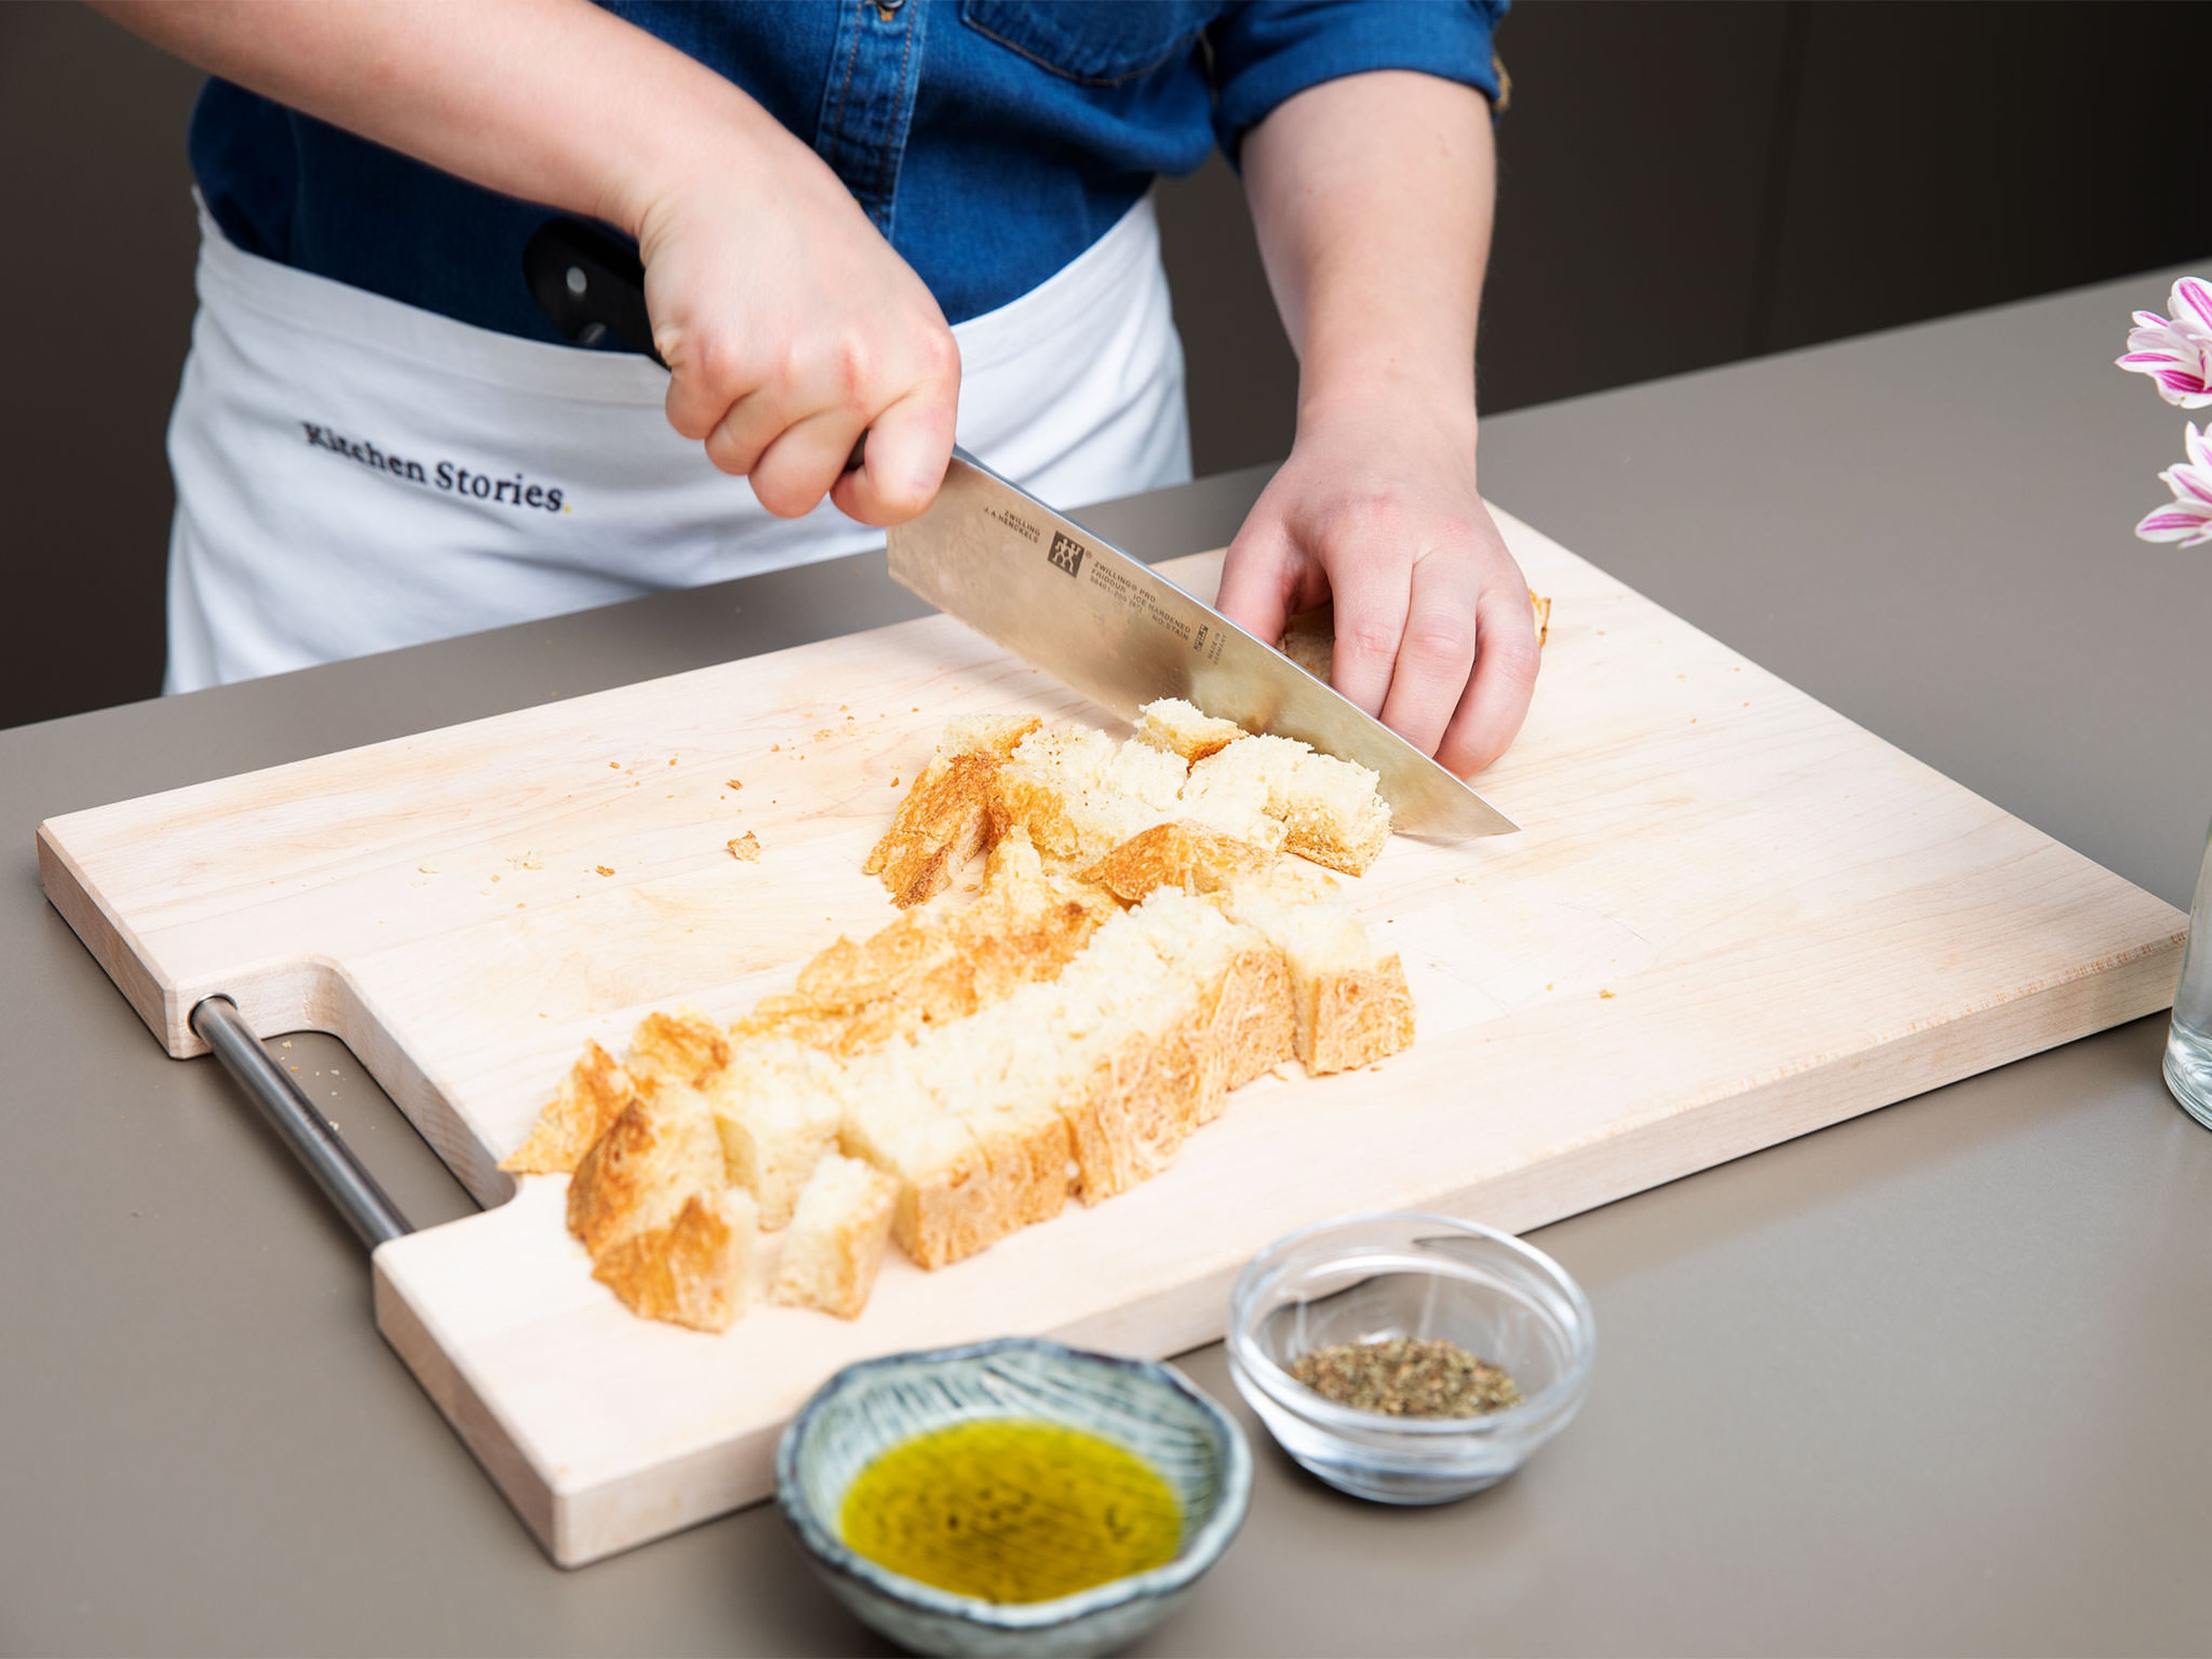 Preheat oven to 180°C/350°F. Cut the two slices of bread into cubes. Transfer to a bowl, add olive oil and dried basil, and toss until evenly coated. Transfer to a baking sheet and bake for approx. 8 – 10 min. or until golden.